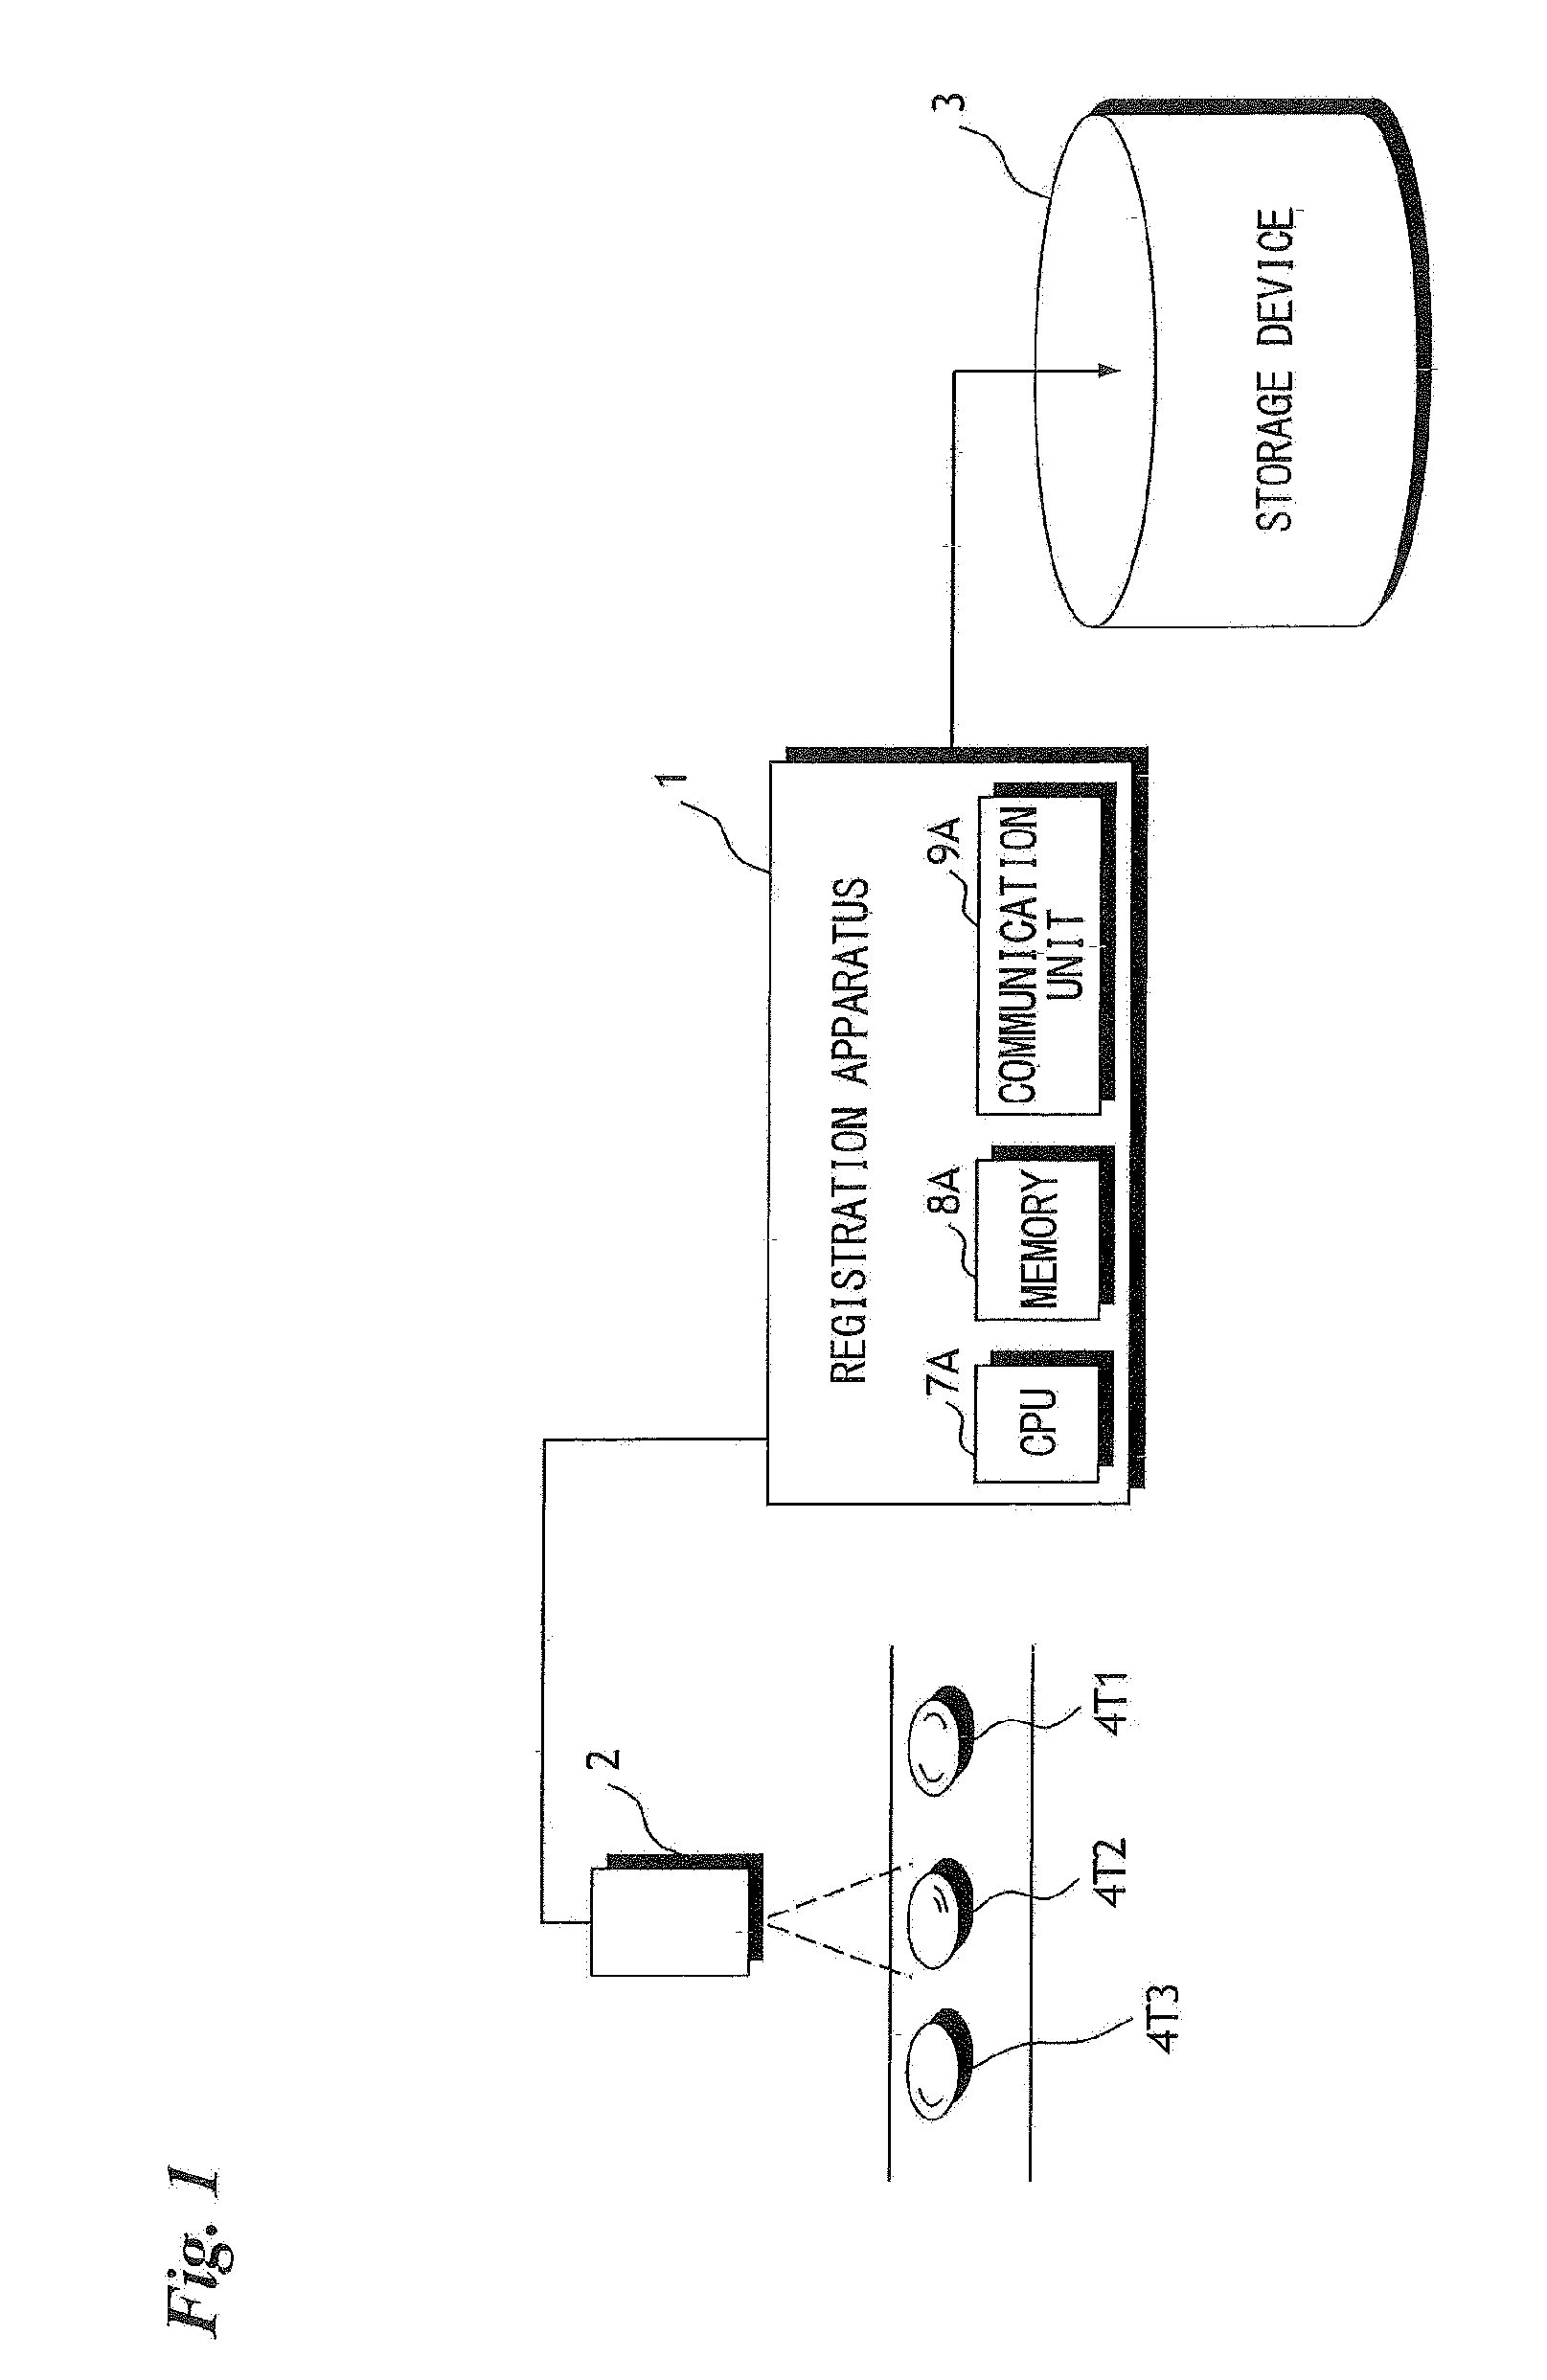 Authenticity determination system, feature point registration apparatus and method of controlling operation of same, and matching determination apparatus and method of controlling operation of same